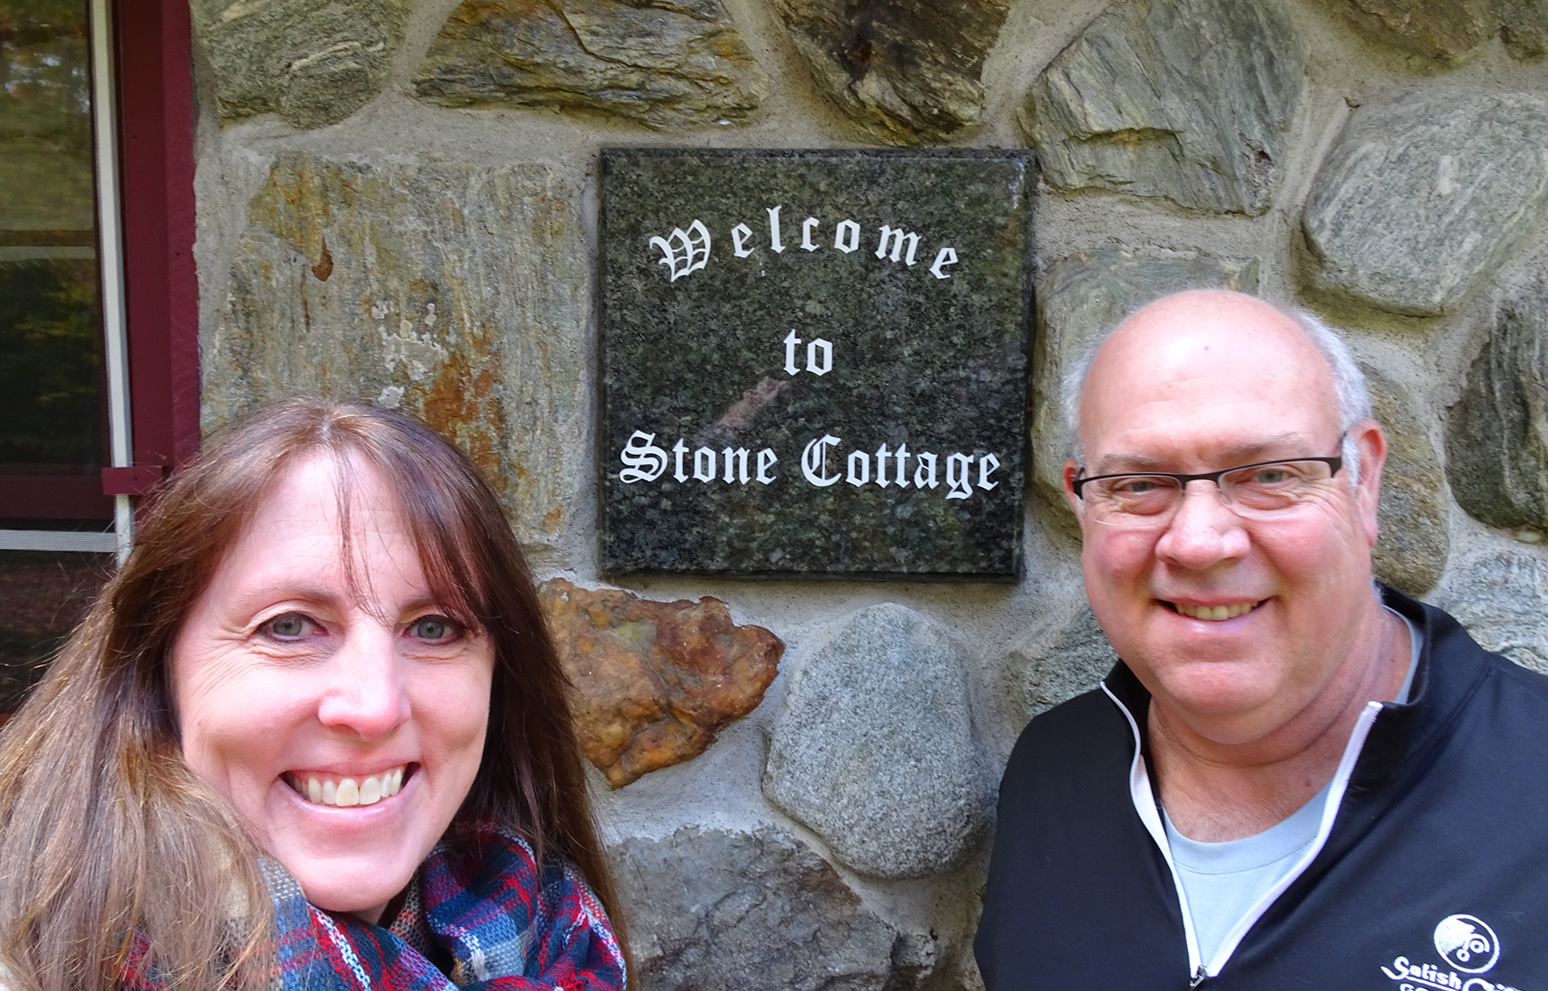 We fell in love with your cottage! - Lori Schremser Stoner